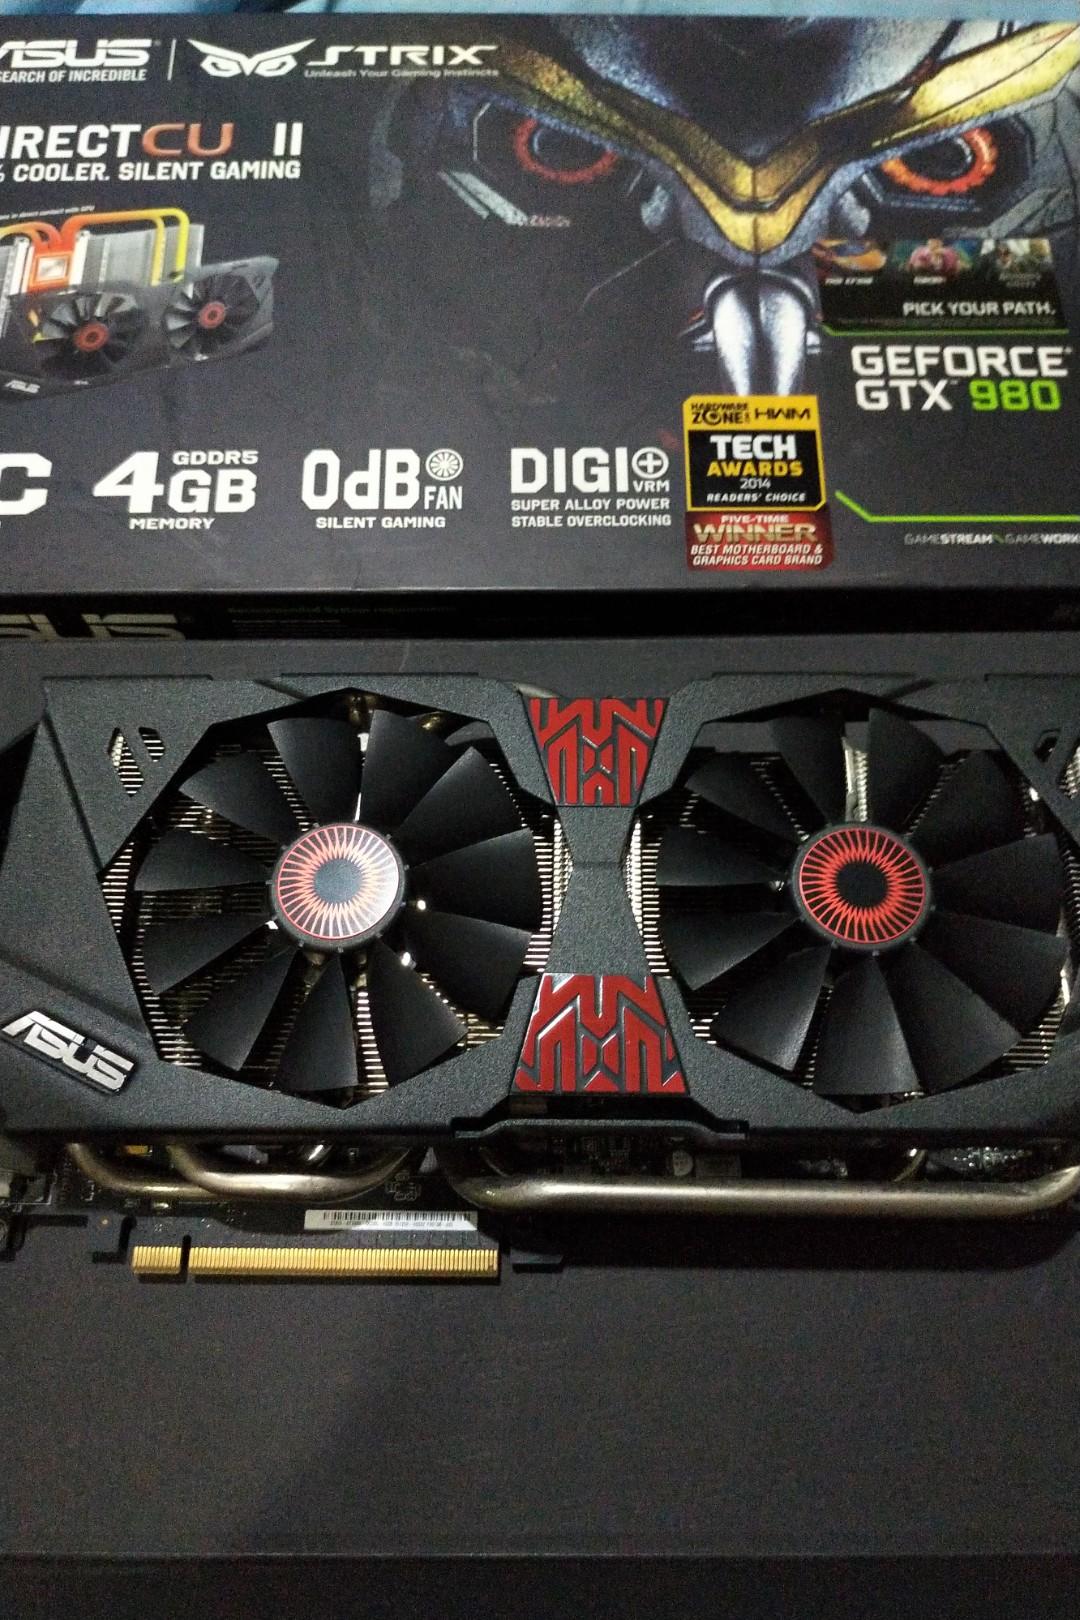 Asus Strix Gtx 980 Nvidia Full Box Mint Computers Tech Parts Accessories Computer Parts On Carousell